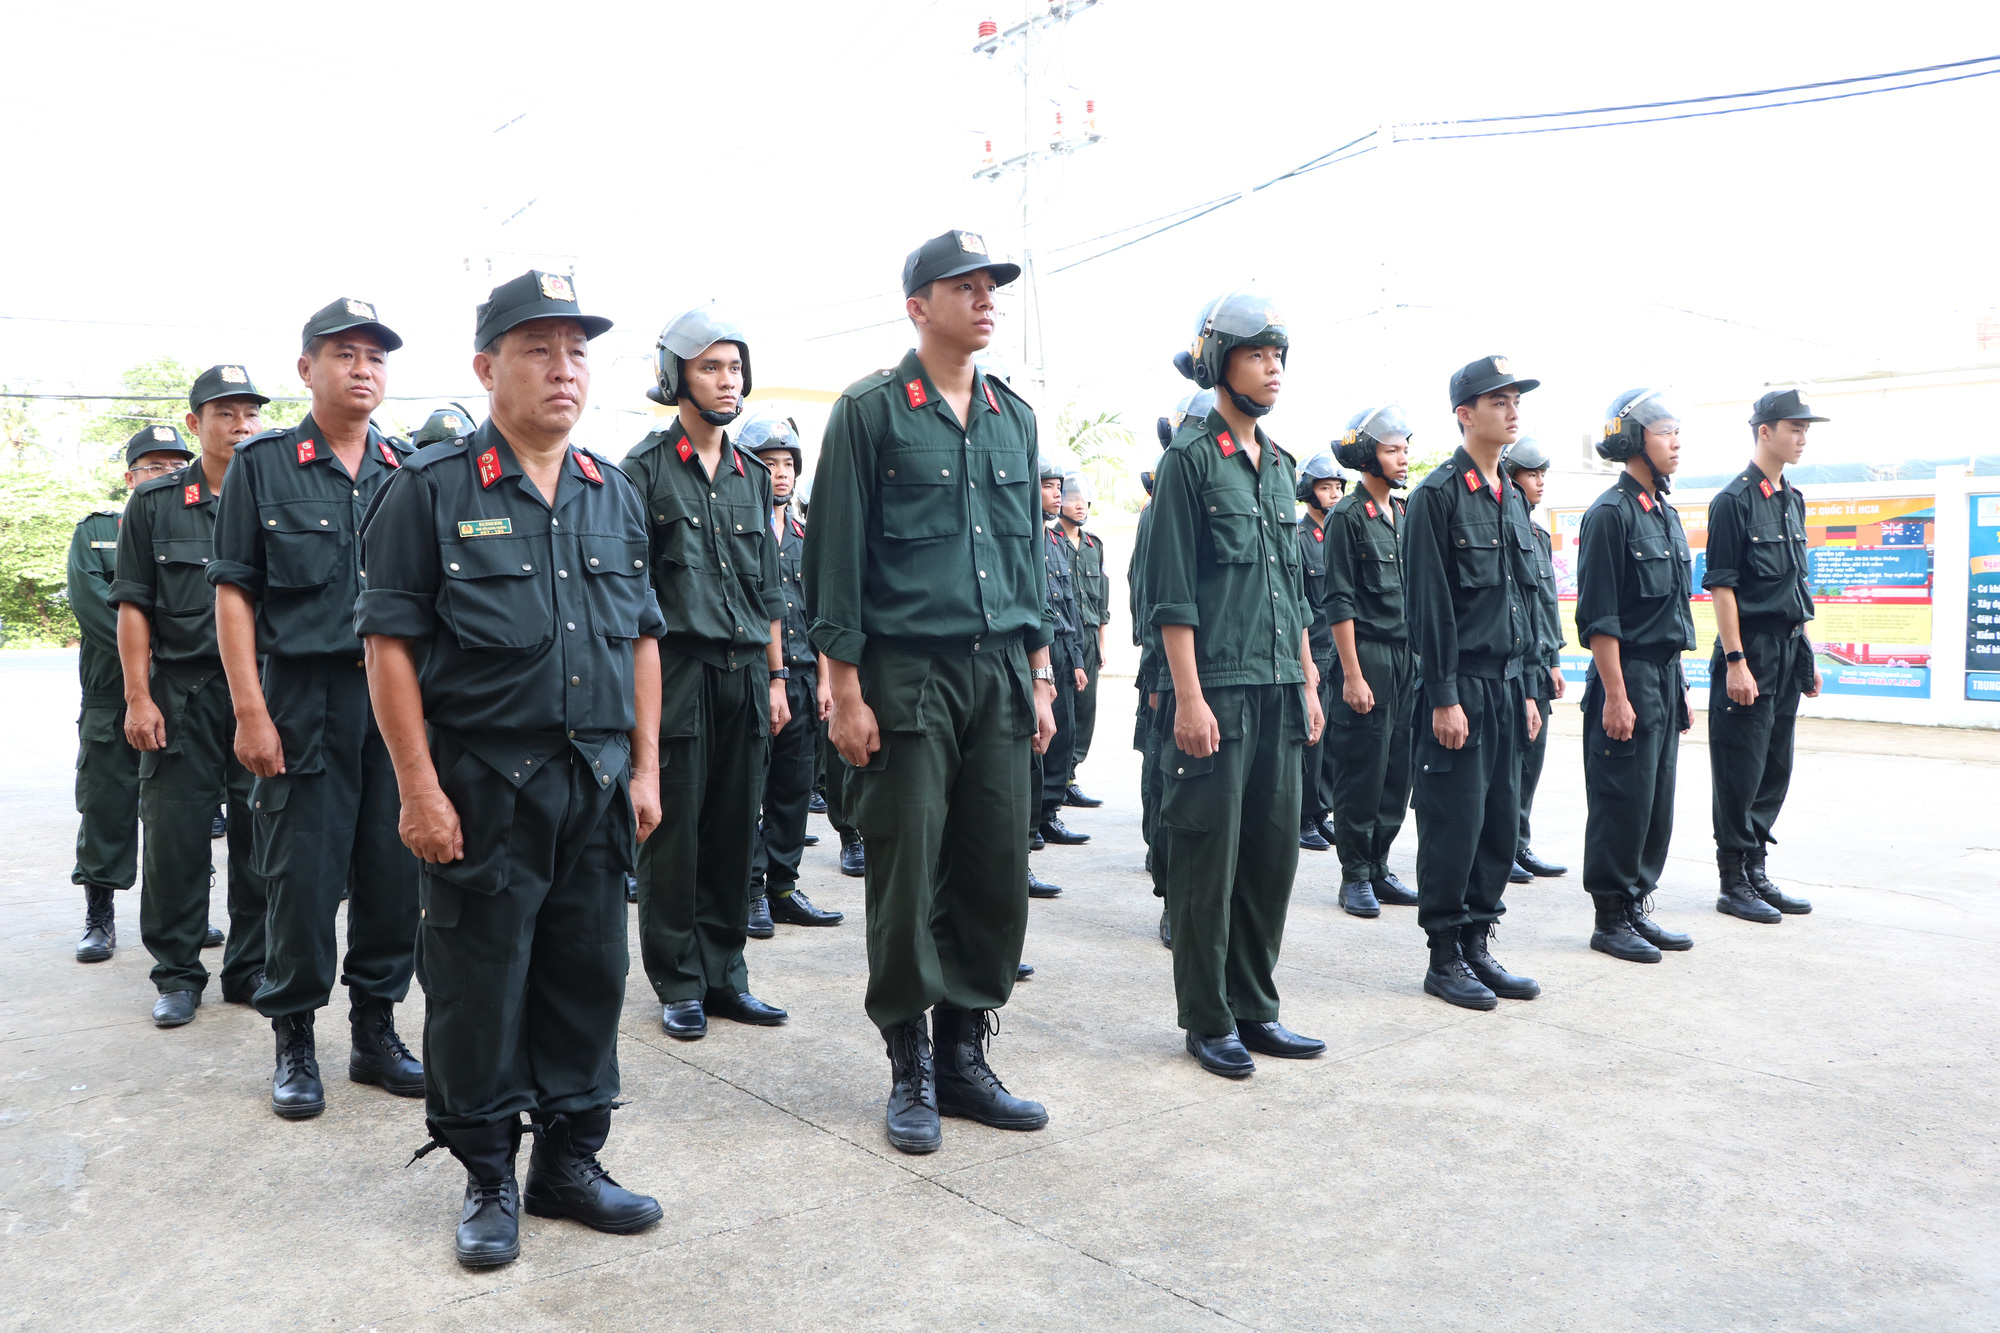 Mobile police force makes debut on Vietnam's Phu Quoc